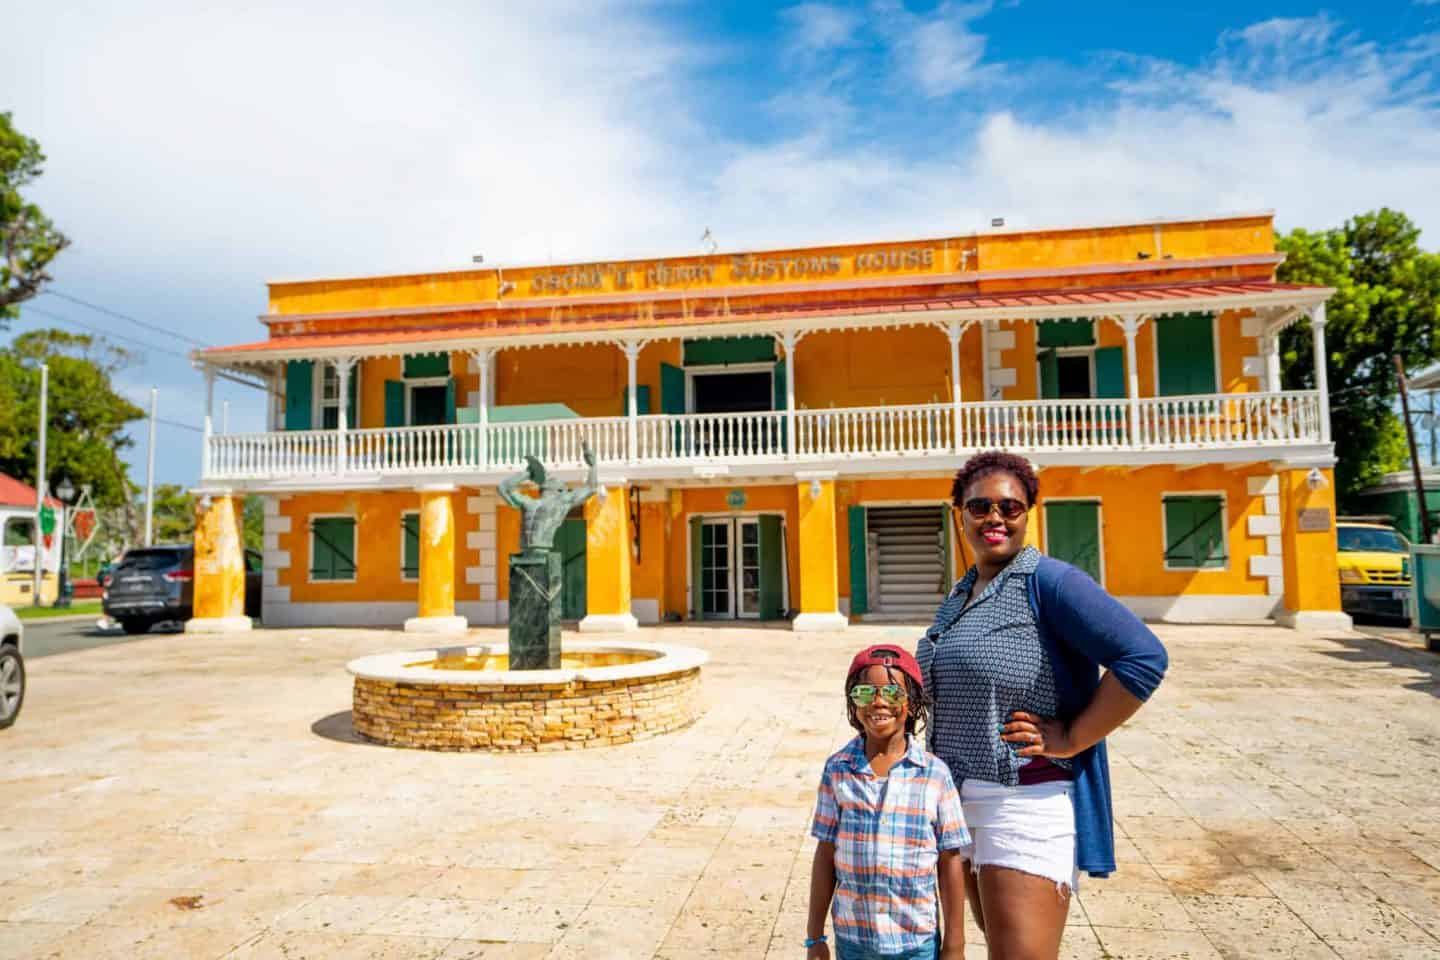 Black Family Travel Things To Do In St Croix Black Family Travel Black Travelers Black Kids Travel Black Family Traveling The World Black Worldschoolers African American Family 61